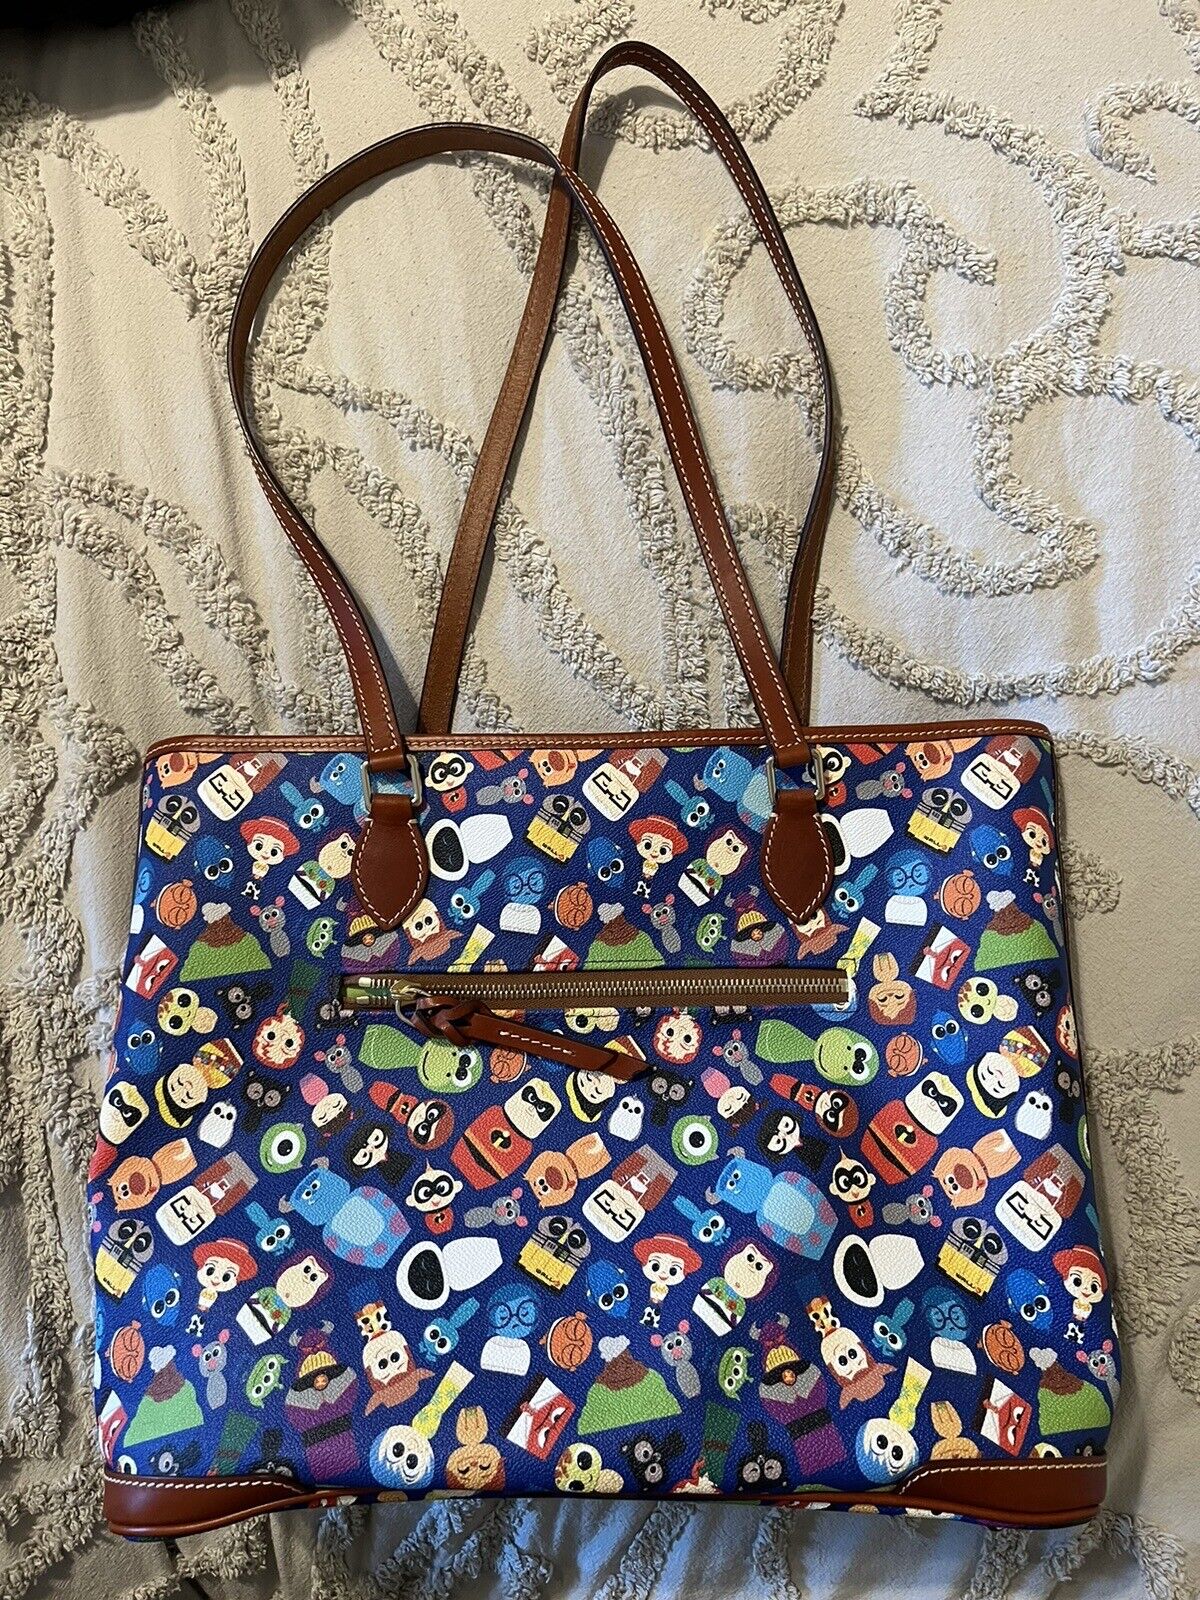 Disney Pixar First Blue Dooney And Burke Tote Purse - Opened But Never Used